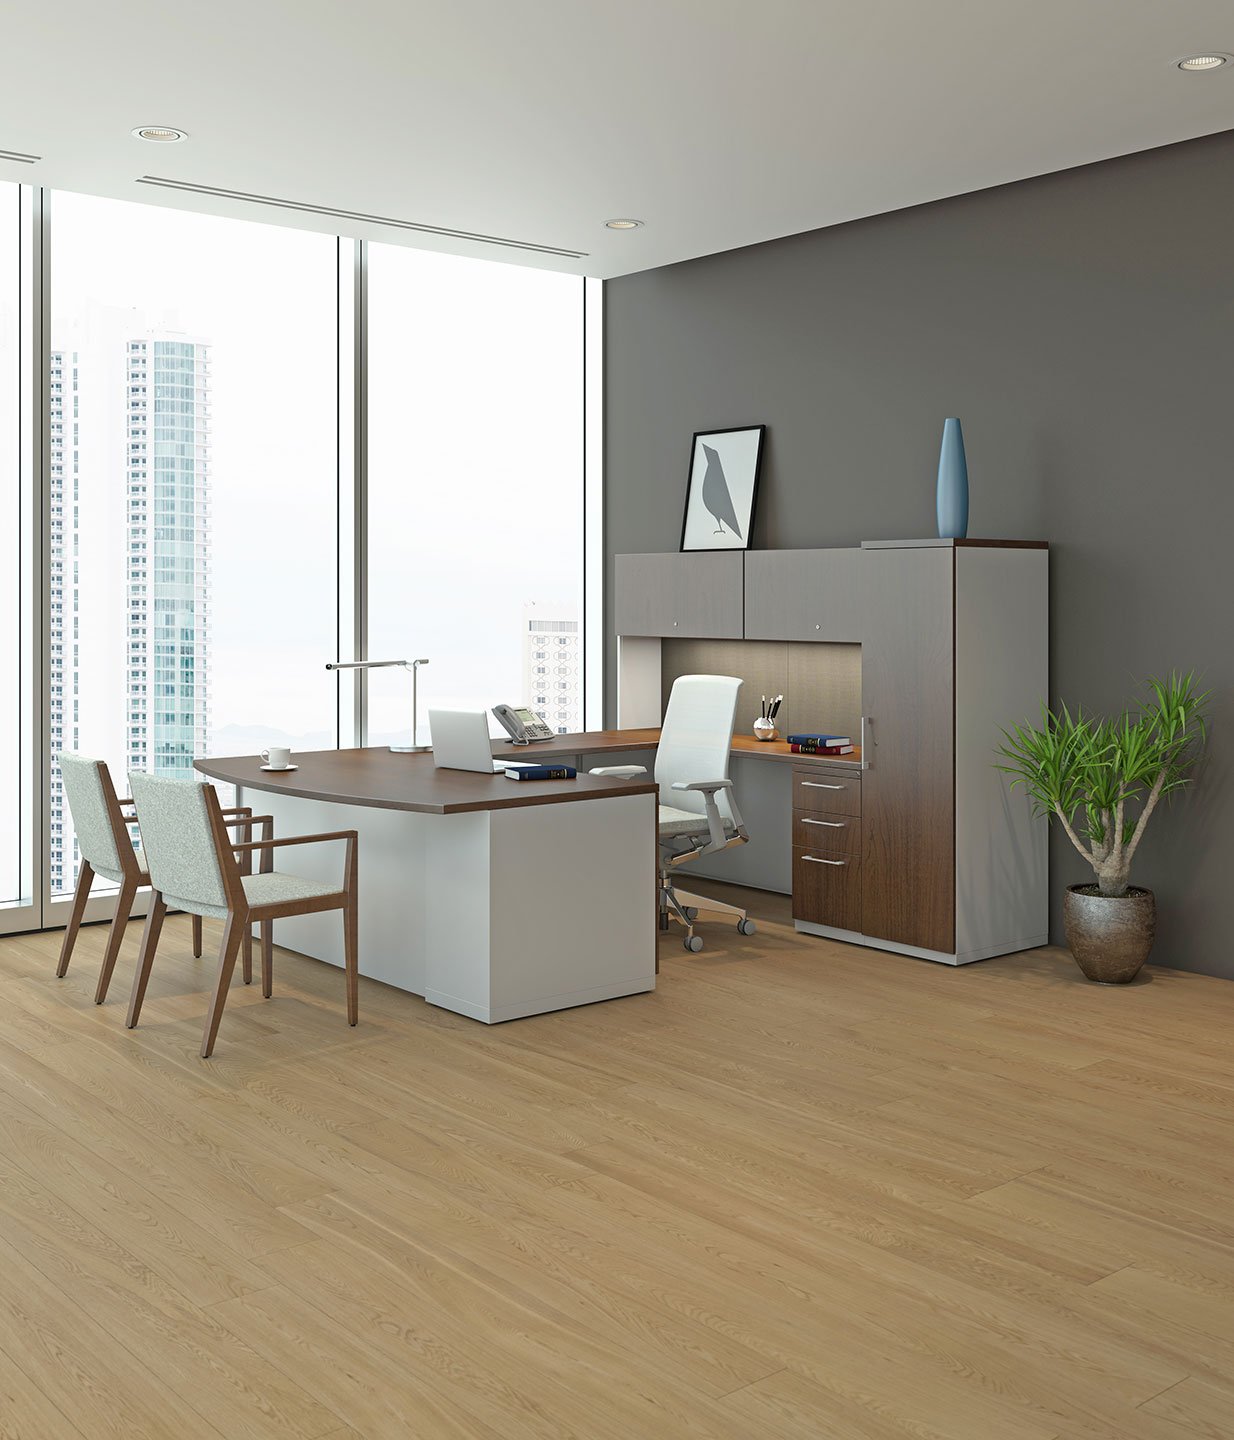 Haworth X Series Desk in dark wood color in a private executive office overlooking city with white chair at desk